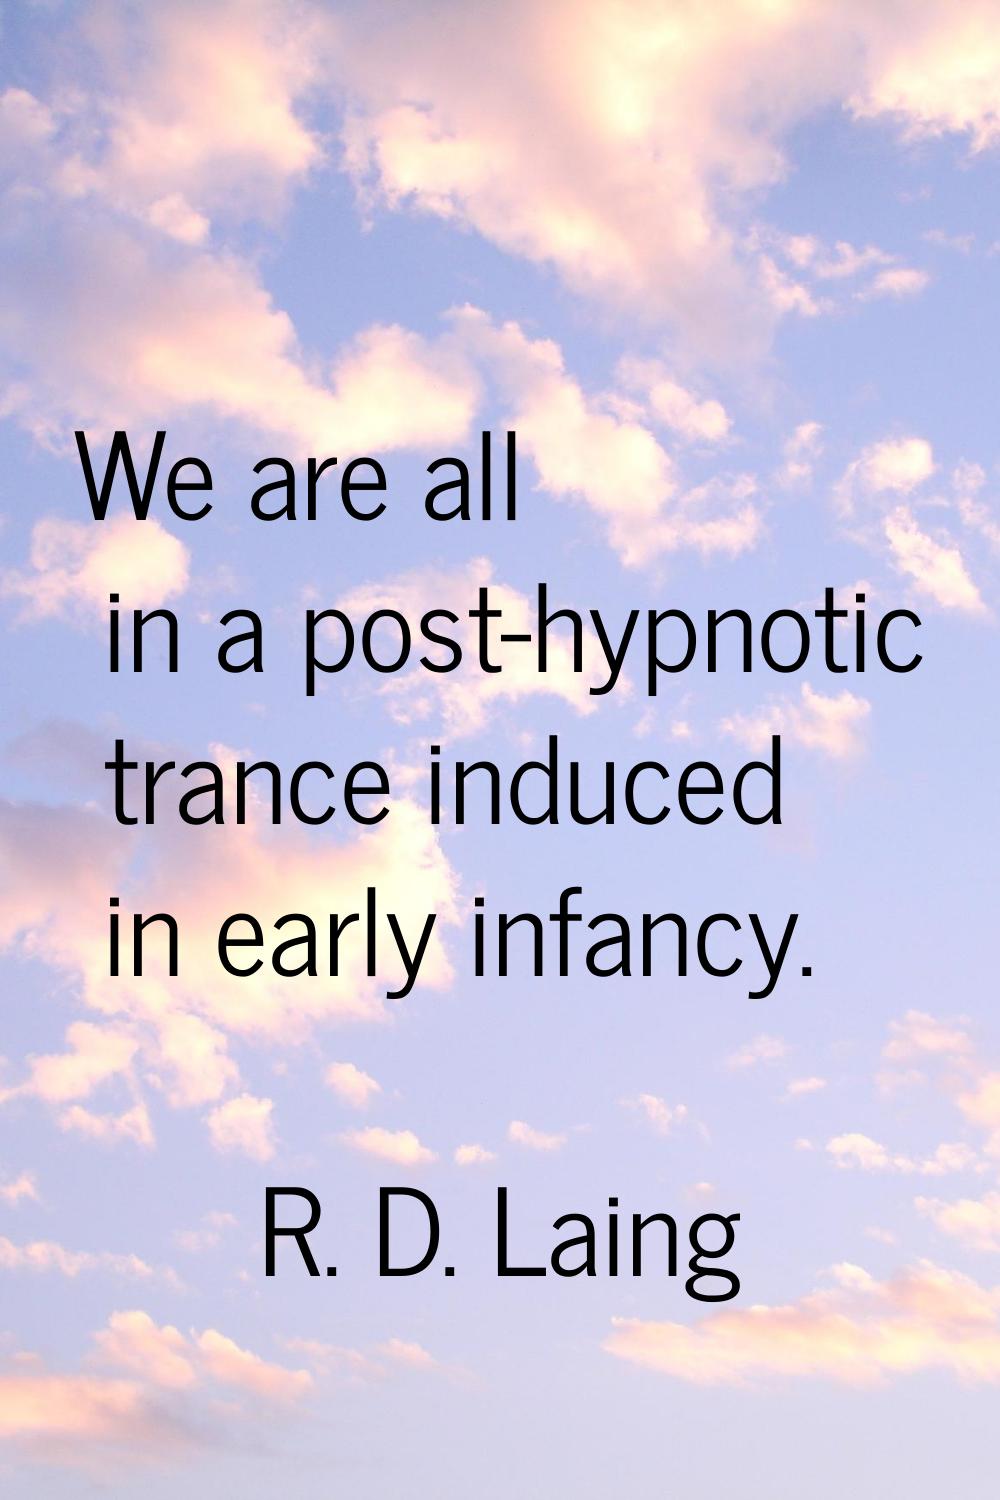 We are all in a post-hypnotic trance induced in early infancy.